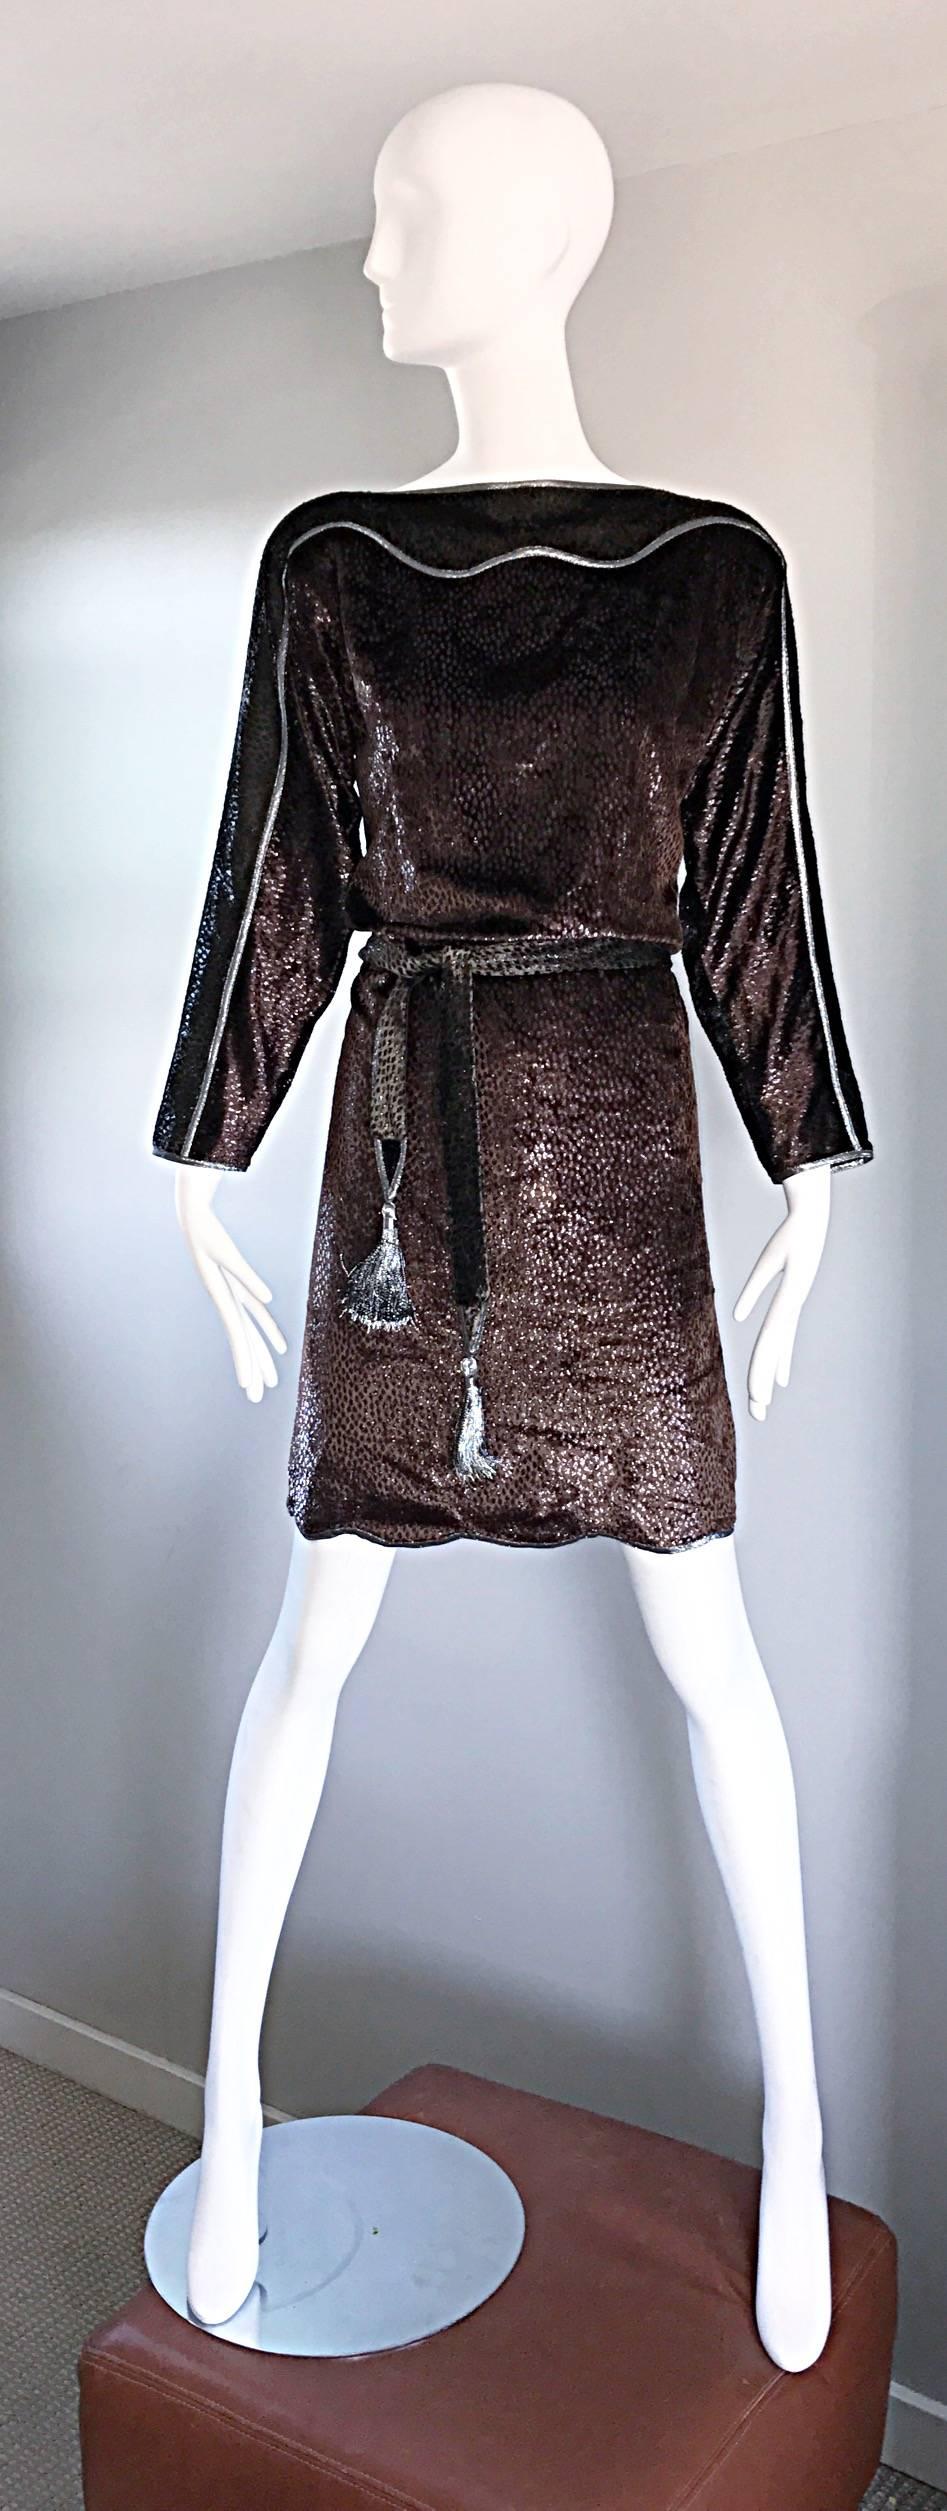 Sensational vintage GEOFFREY BEENE brown, gray, taupe, black and silver burnt out silk velvet long sleeve dress! Features and allover animal like print in brown and black. Scalloped grey / taupe details at sleeves and collar. Detachable belt